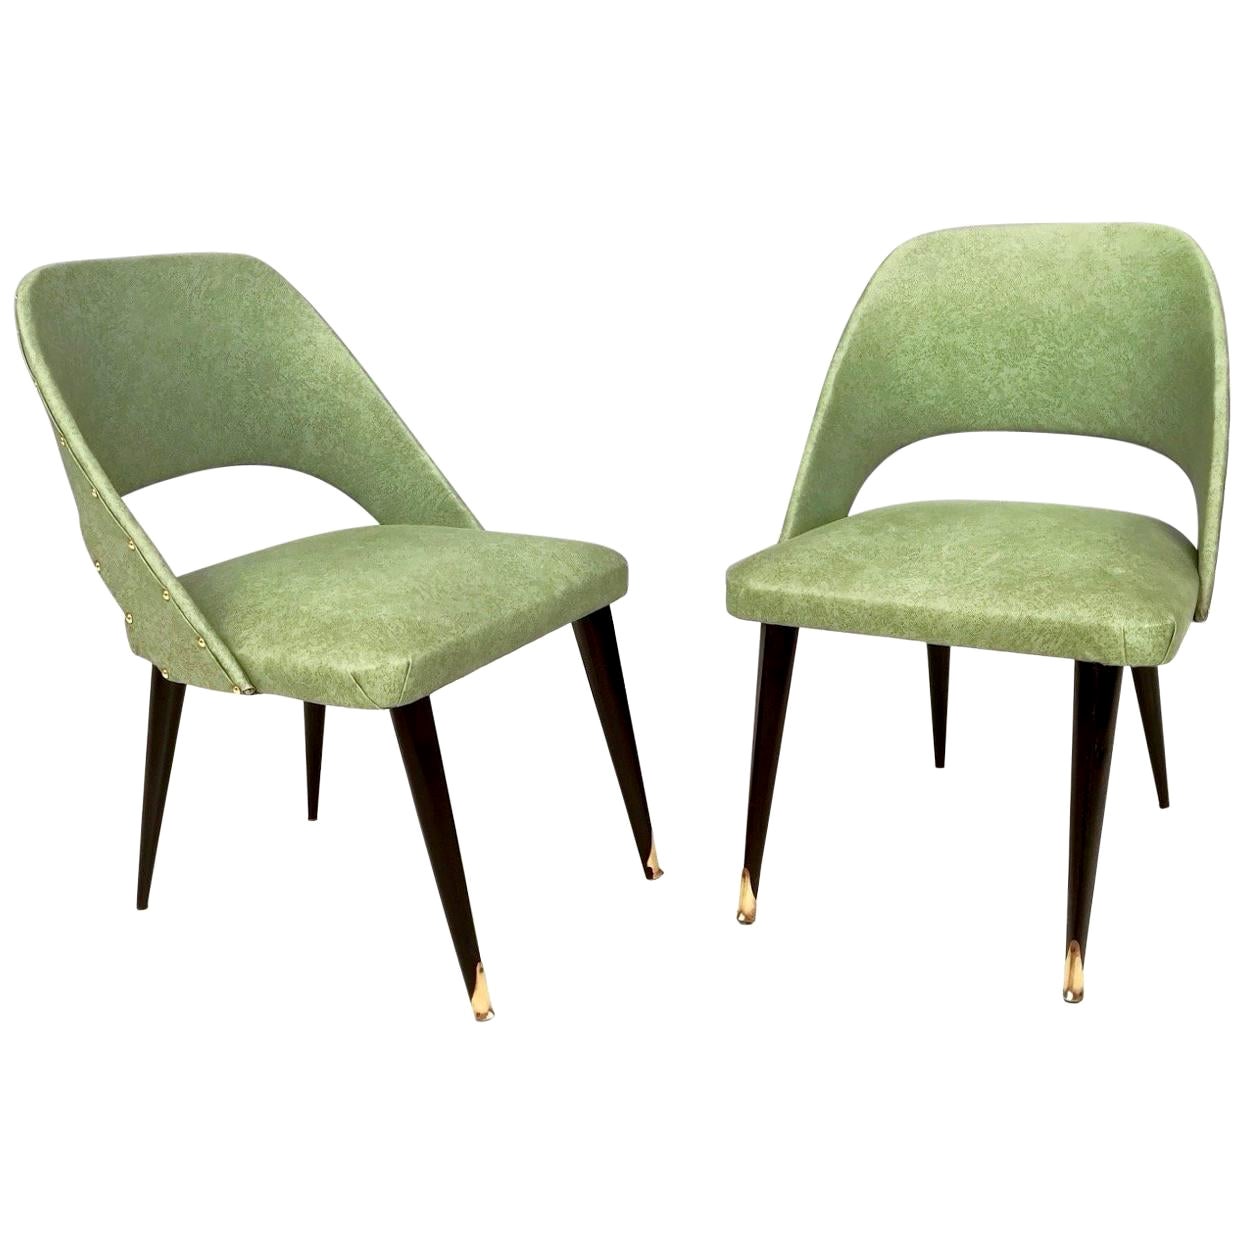 Pair of Vintage Green Skai Side Chairs with Ebonized Wood Legs, Italy